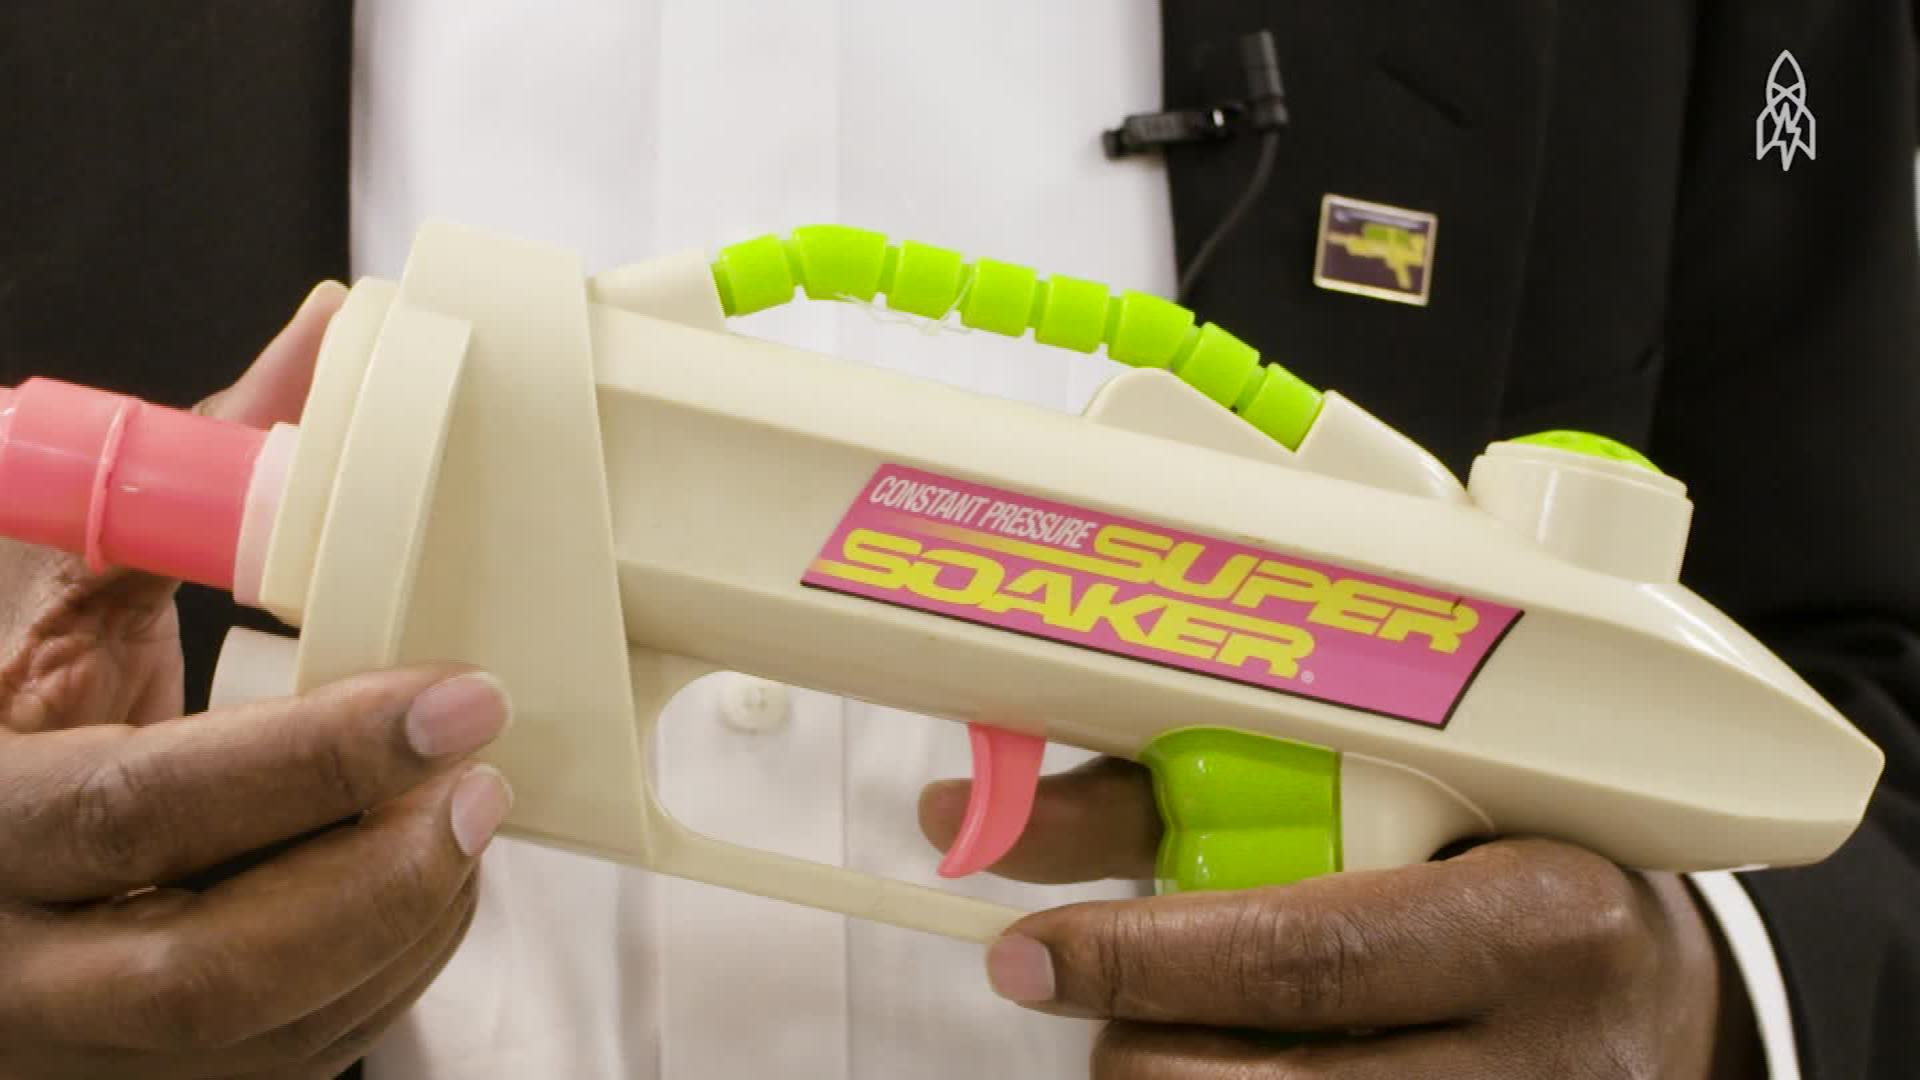 The Super Soaker for the 21st Century!